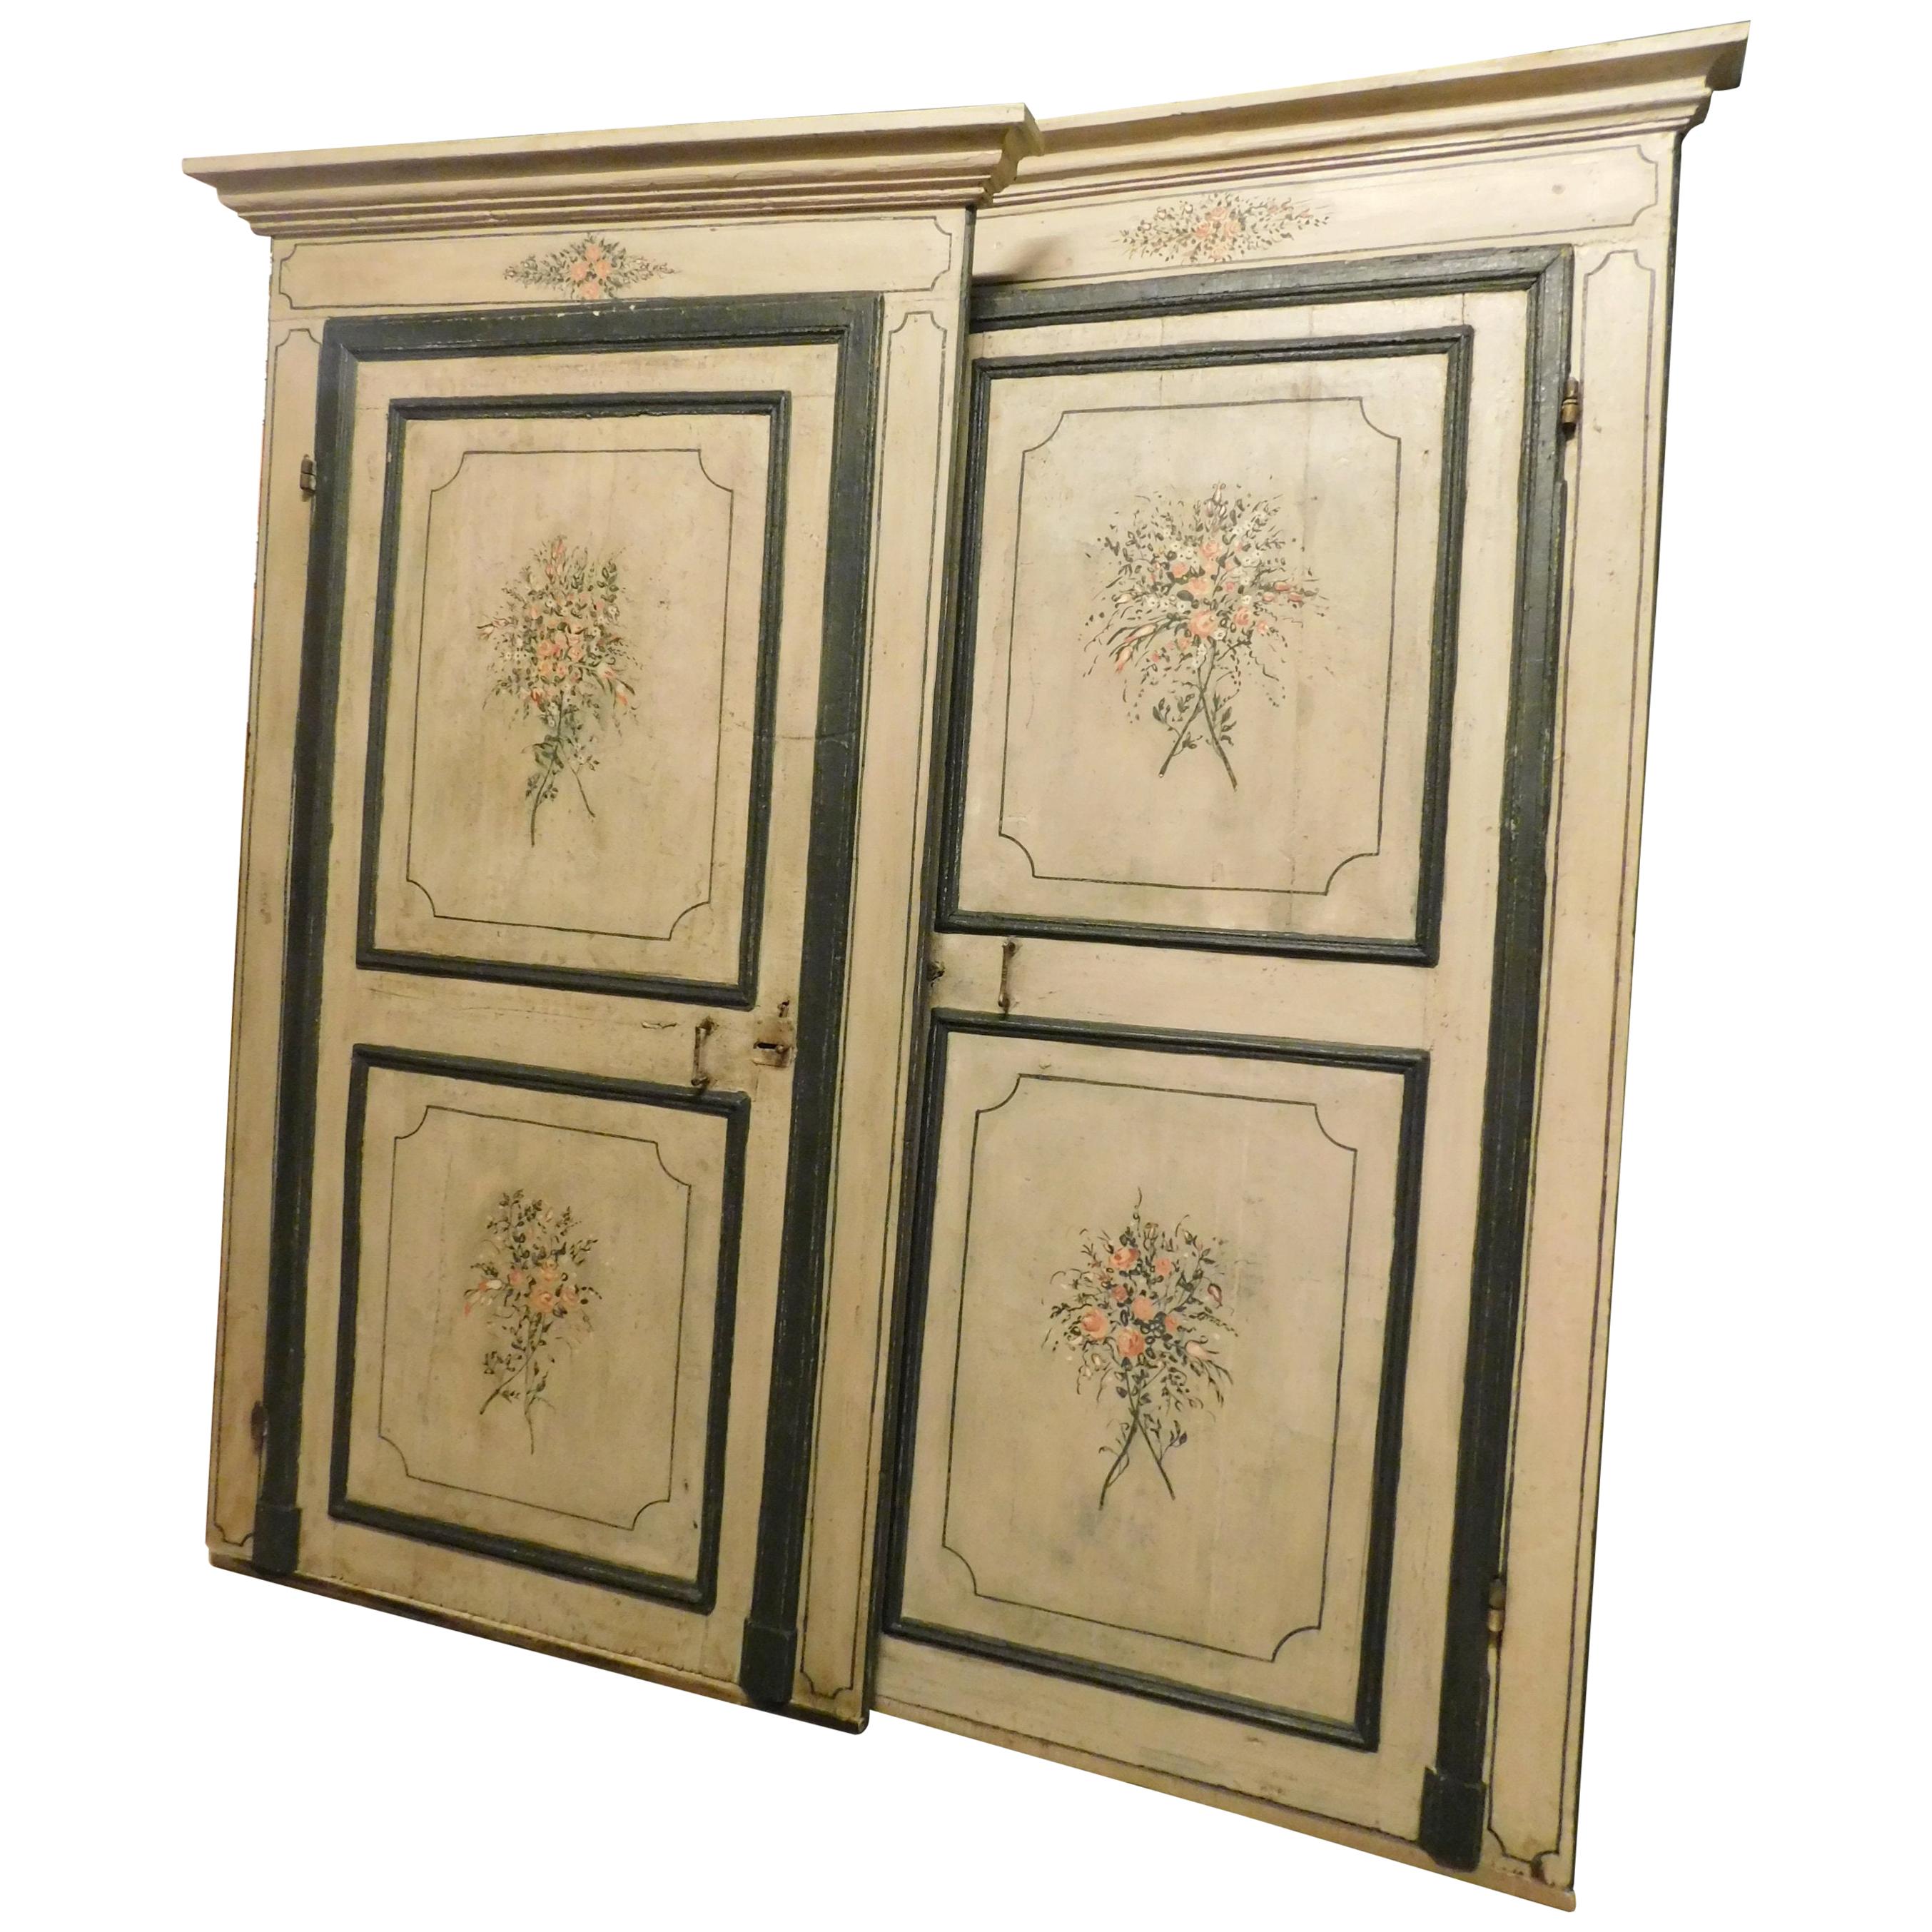 2 Antique Lacquered Doors with Frame, Green Beige Background Flowers, 1700 Italy For Sale